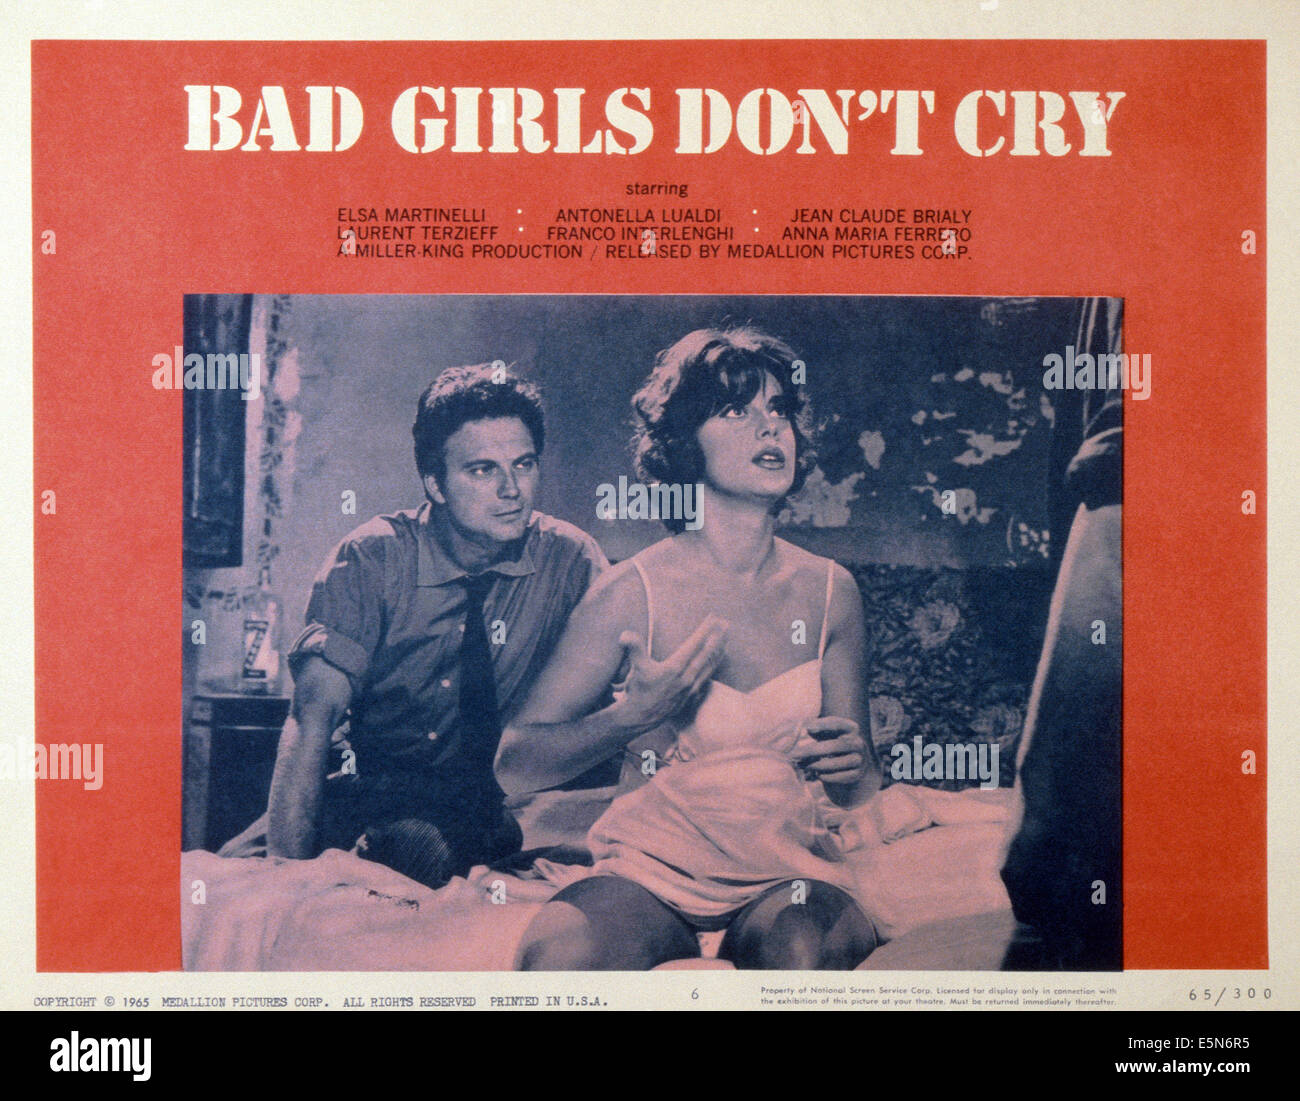 Bad Girls Don't Cry - Wikipedia